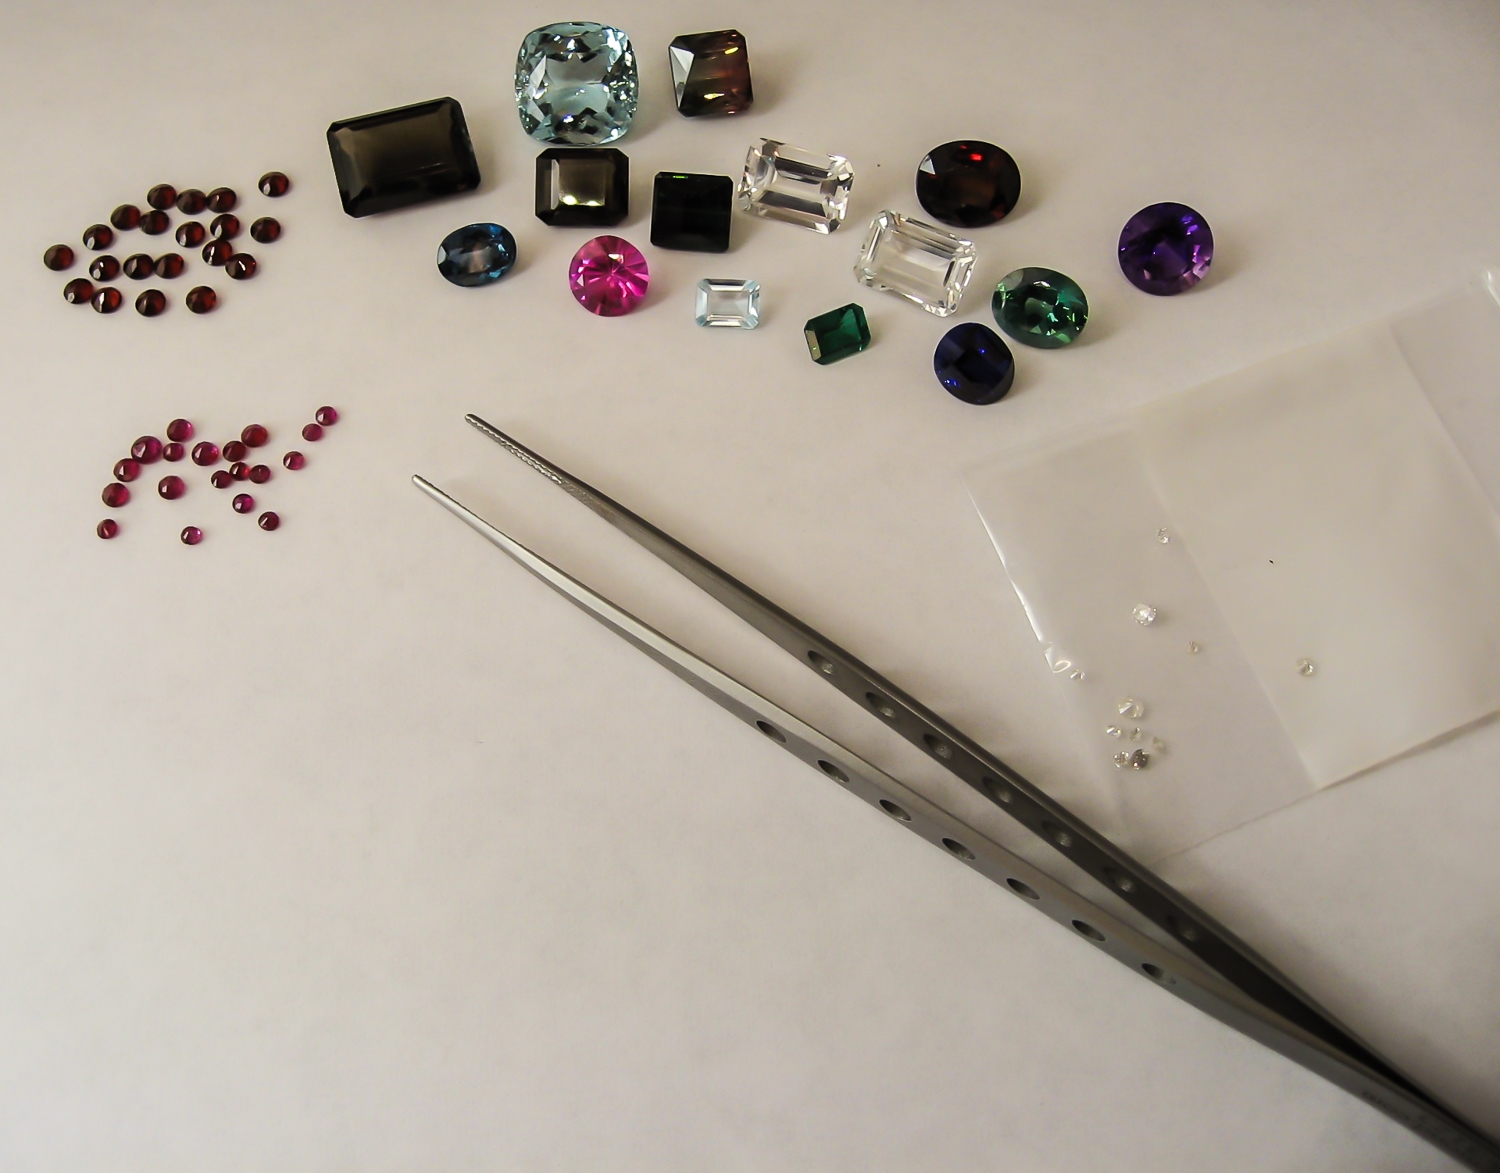   We remove all the gemstones and begin measuring them.  